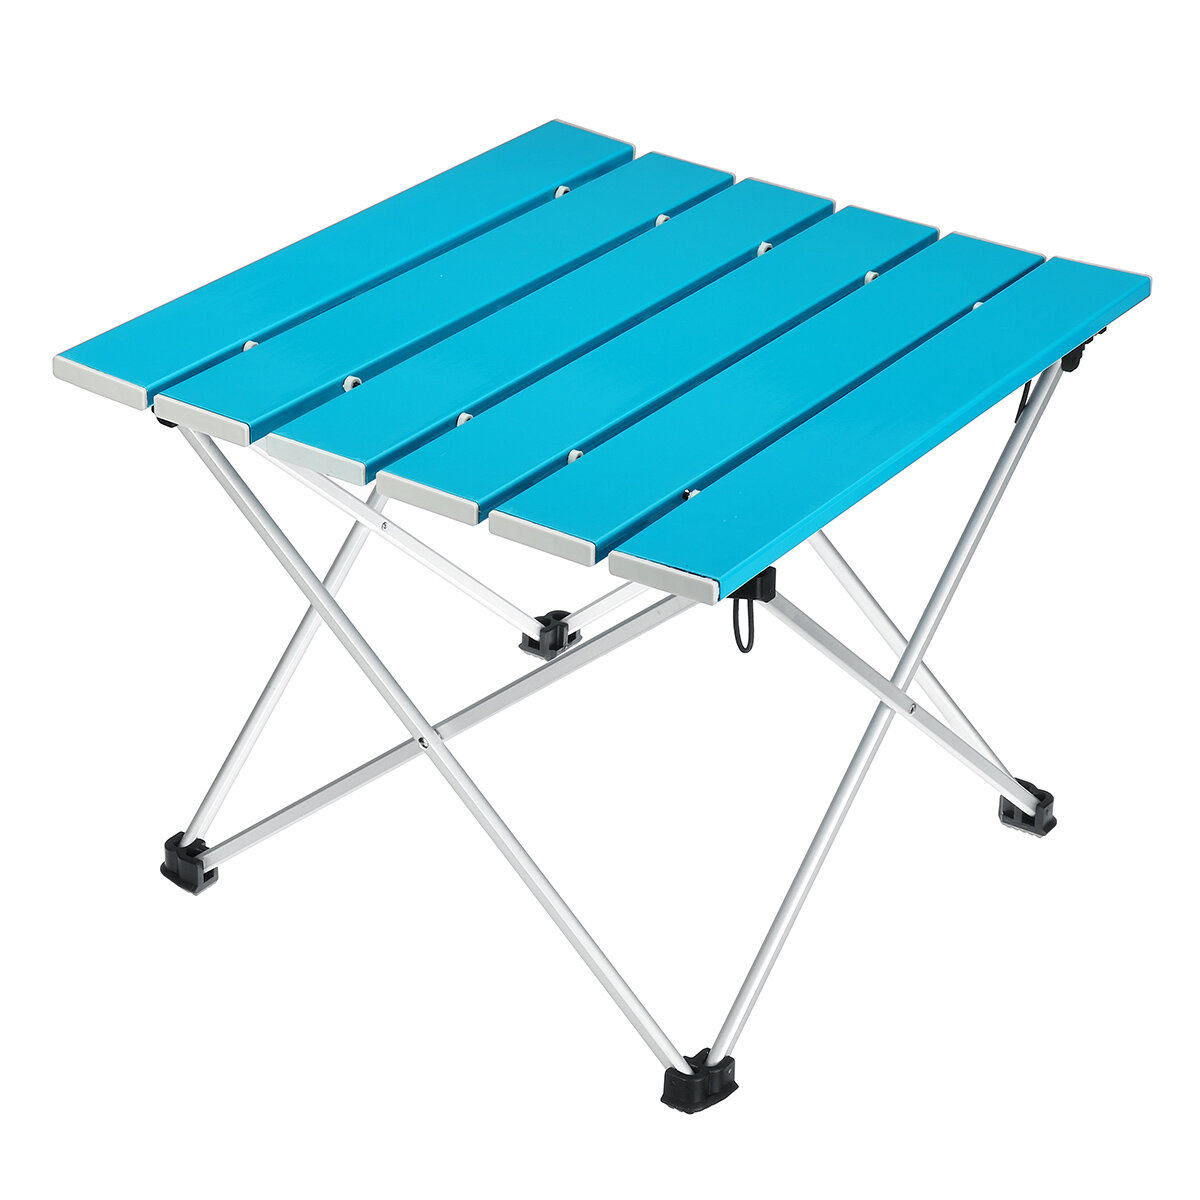 Aluminum Alloy Portable Ultralight Folding Computer Bed Tables Foldable Outdoor Dinner Desk For Family Party Picnic BBQ